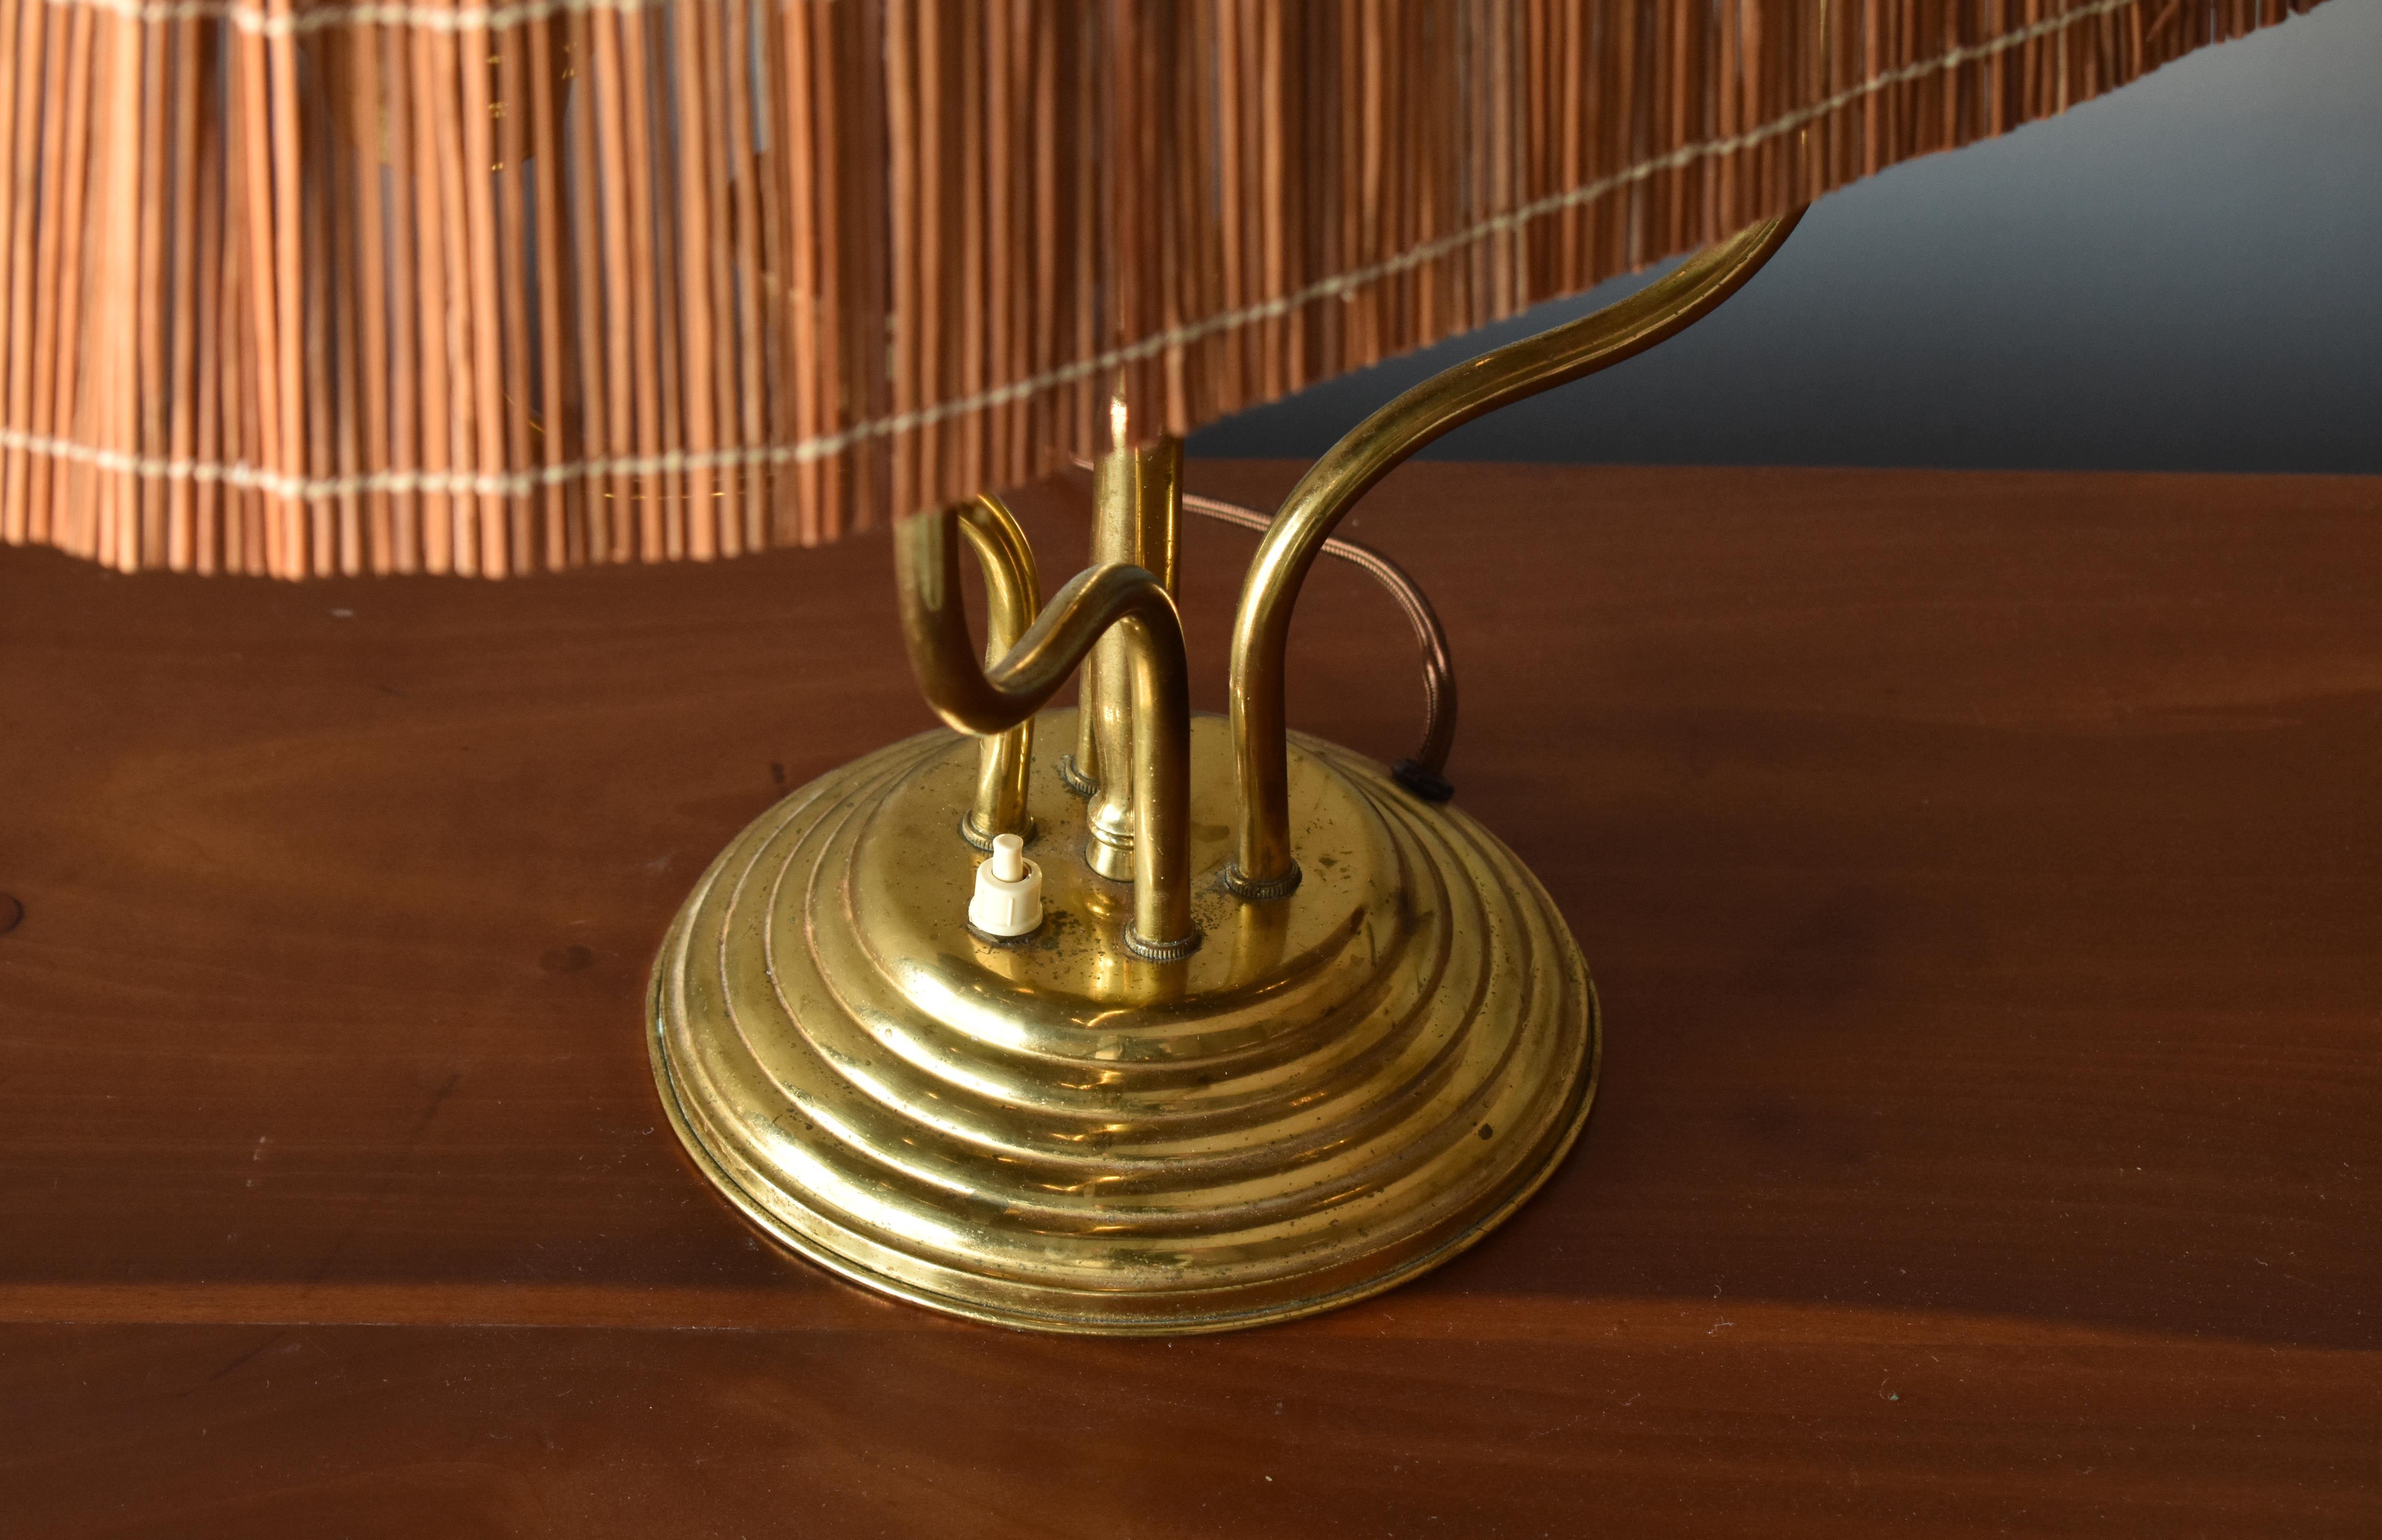 Itsu, Organic Modernist Four Armed Table Lamp, Brass, Reed, Finland, 1950s (Mitte des 20. Jahrhunderts)